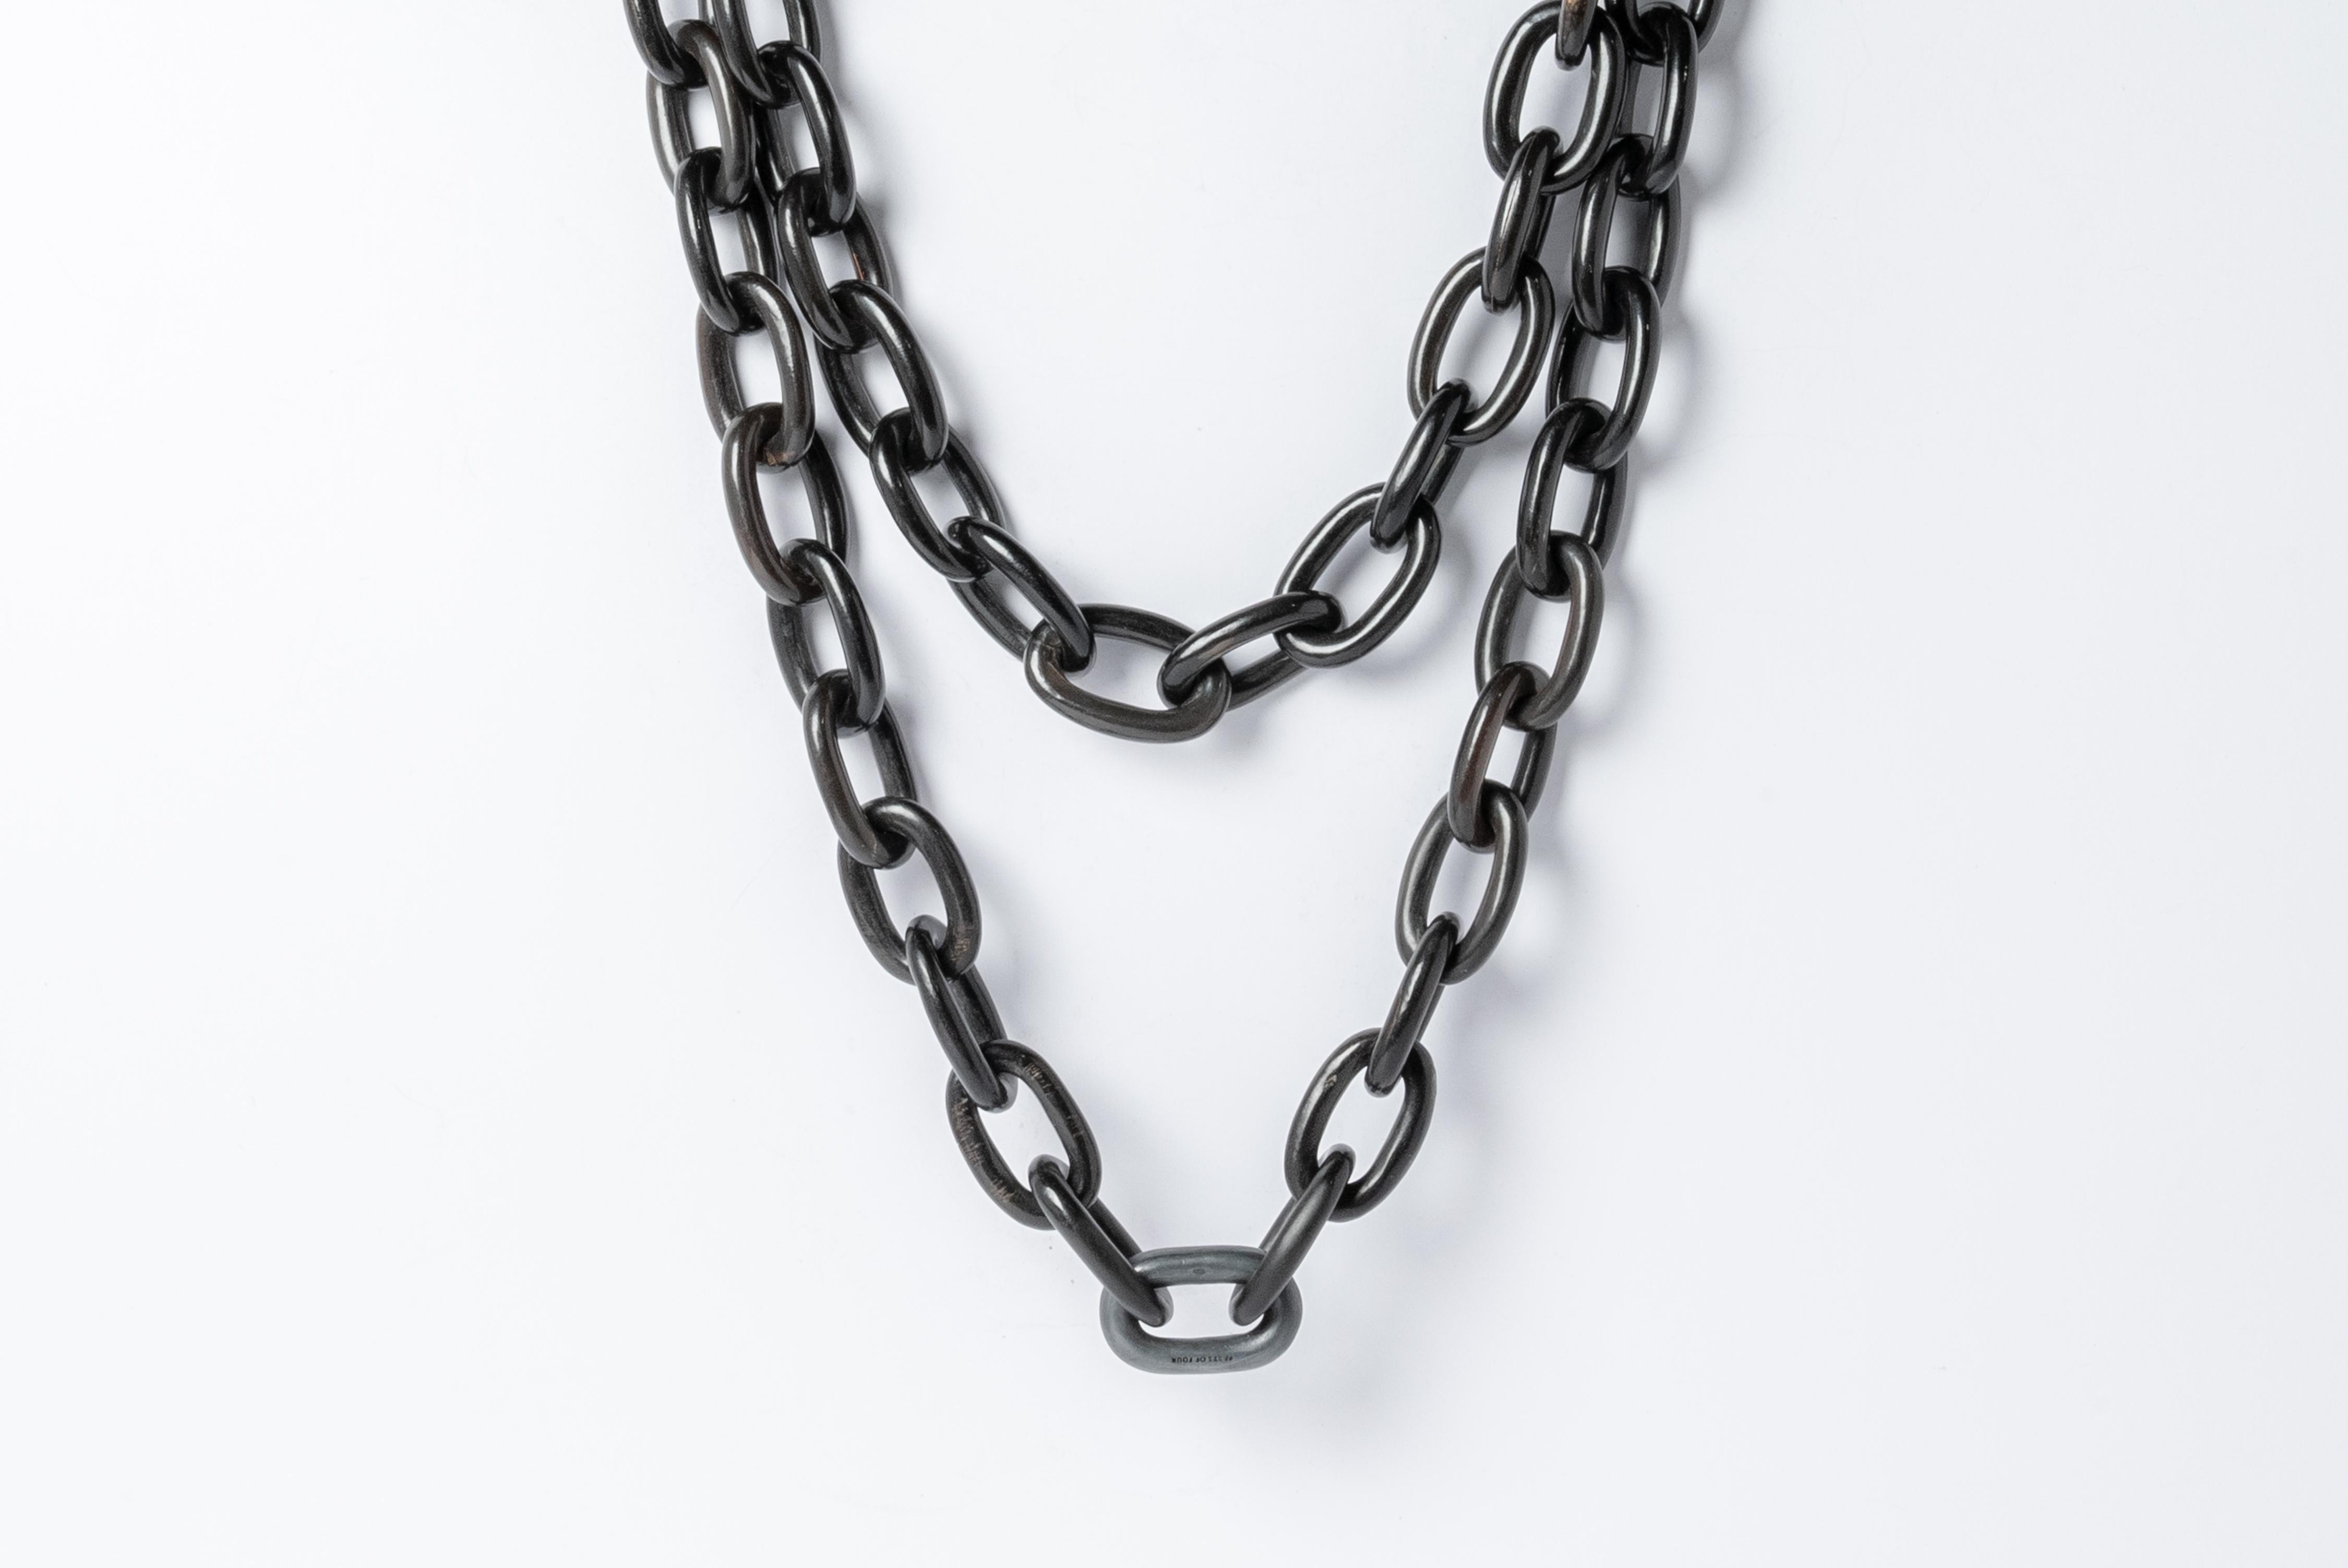 All organic chain is carved by hand. Chains made from horn is modeled and constructed into chain links
The Charm System is an interrelated group of products that can be mixed and matched or worn individually.
Chain link size (L  × H): 33 mm  24